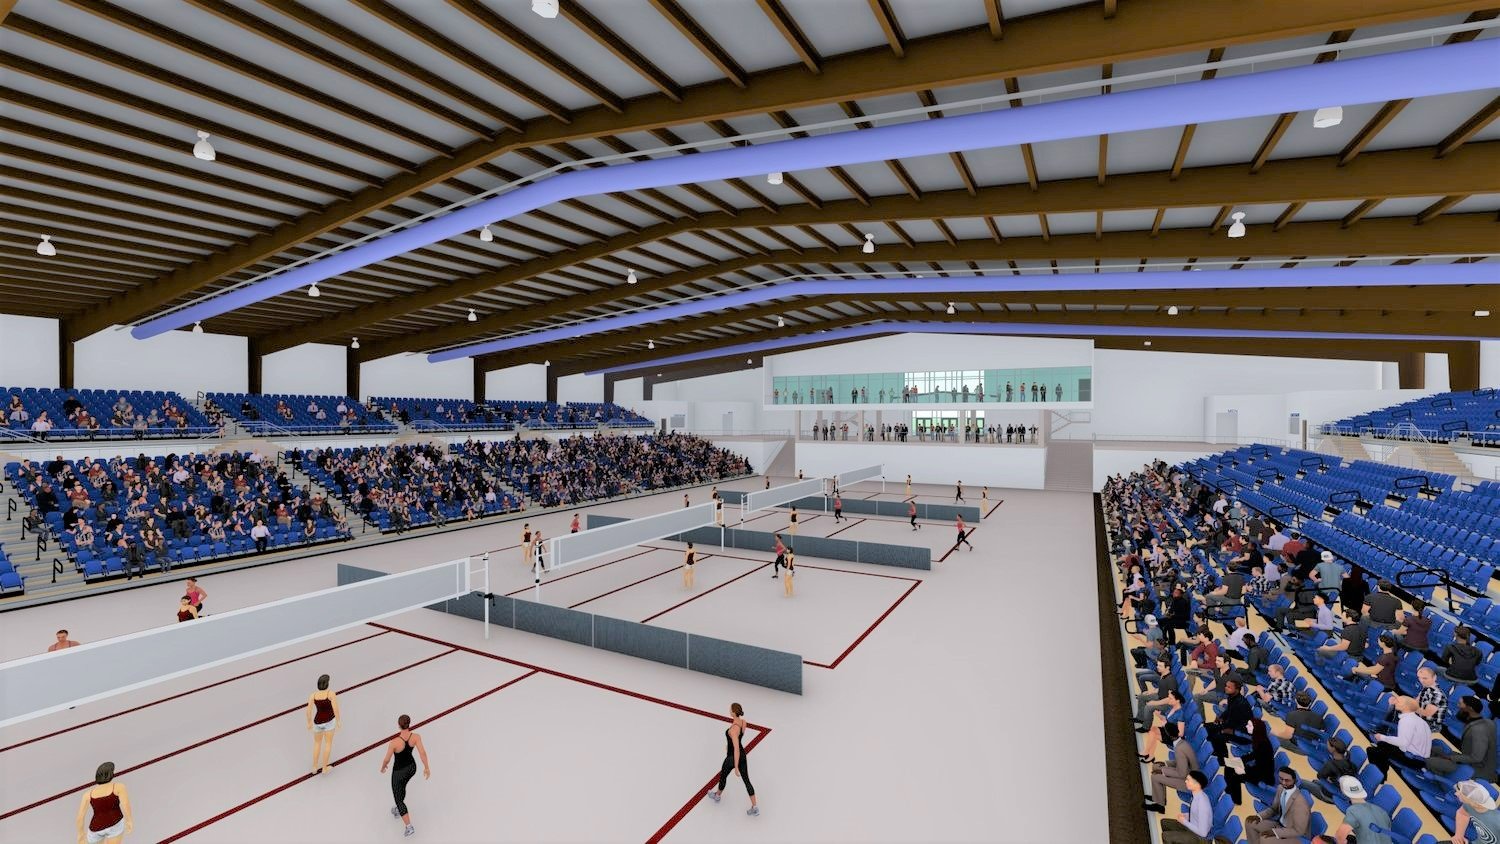 A new arena that’s being developed is part of the master plan. 